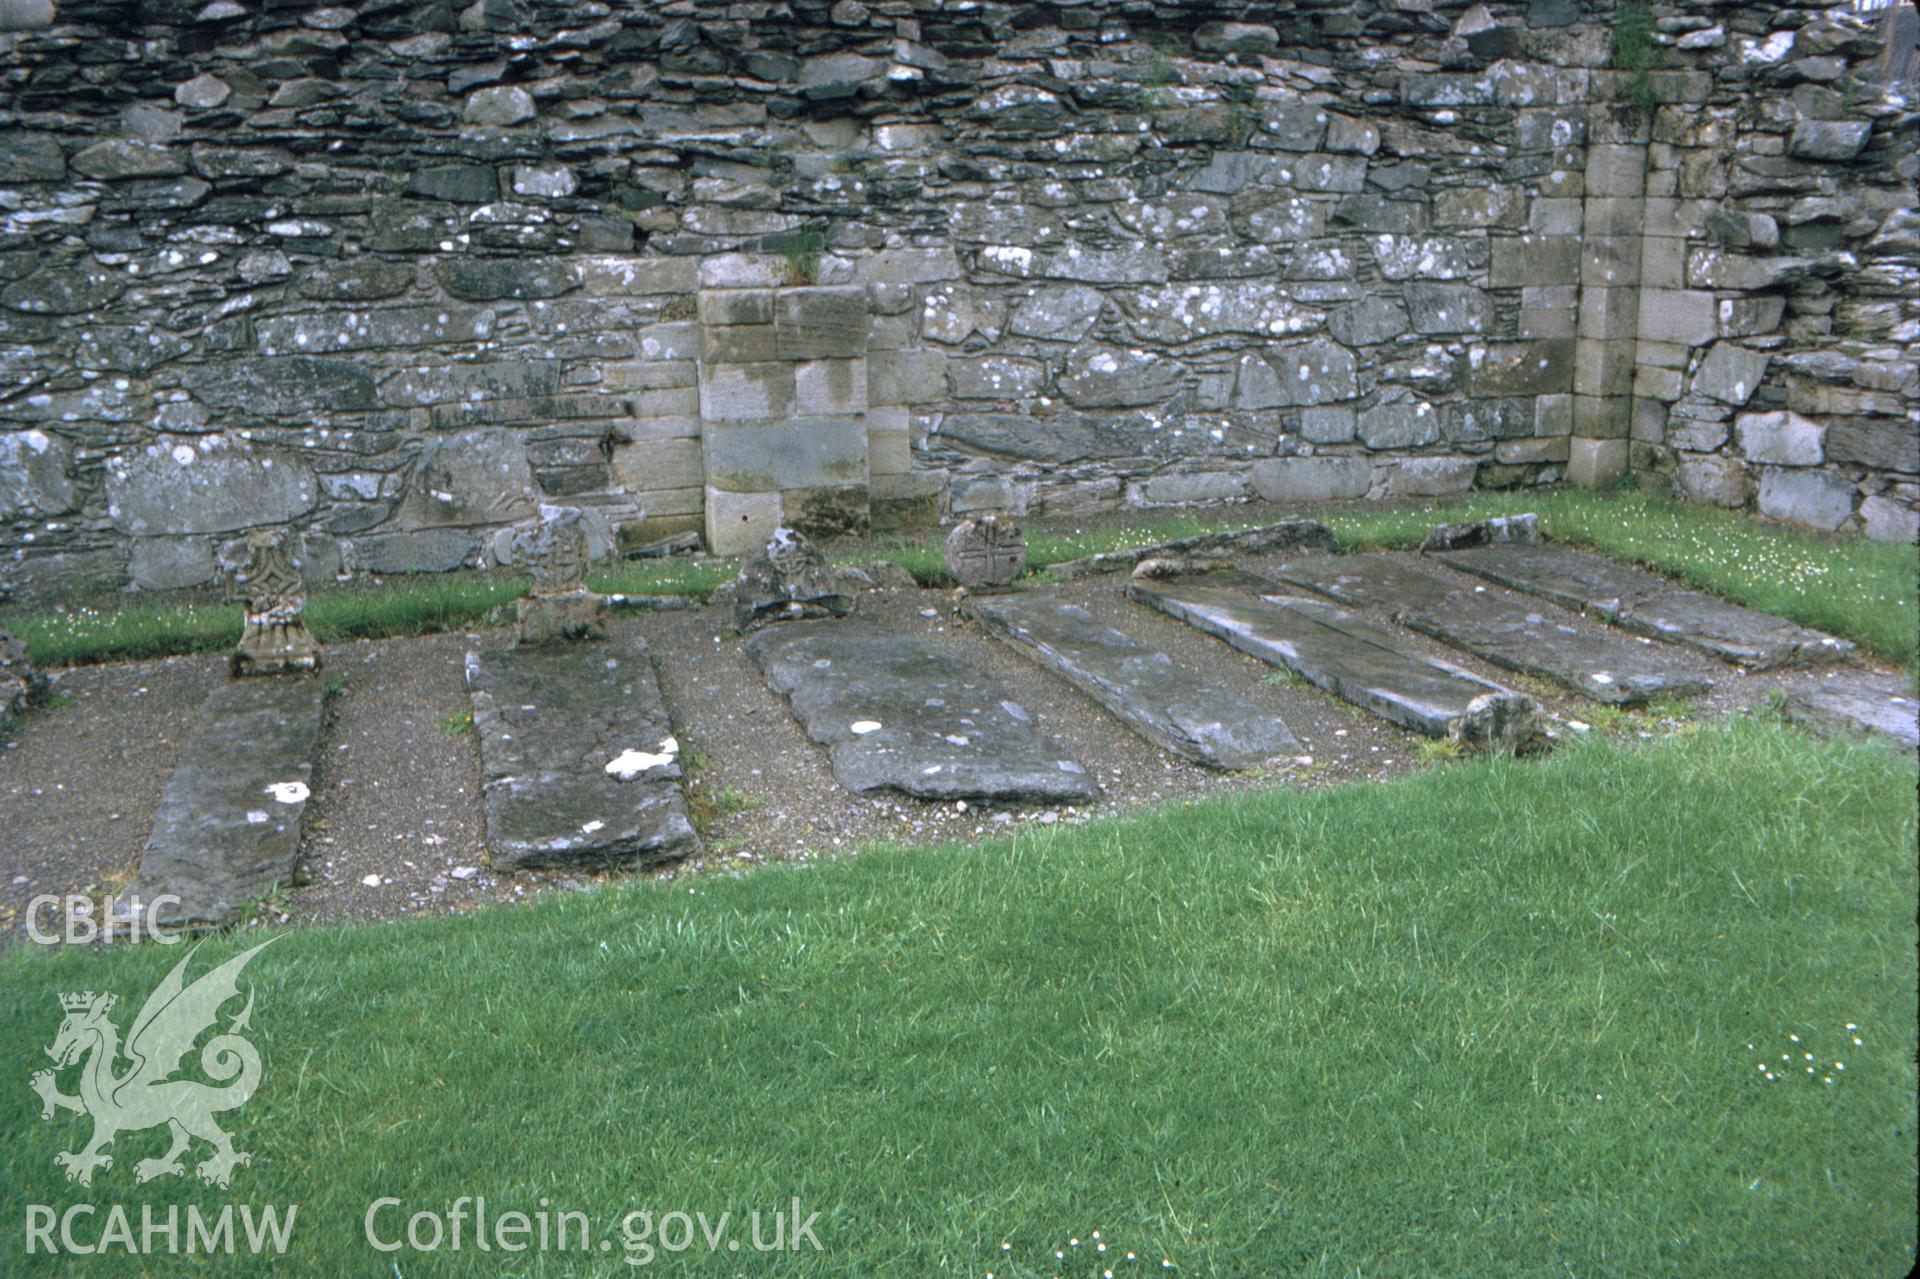 Colour slide showing memorial stones in the churchyard at St Mary's Church.